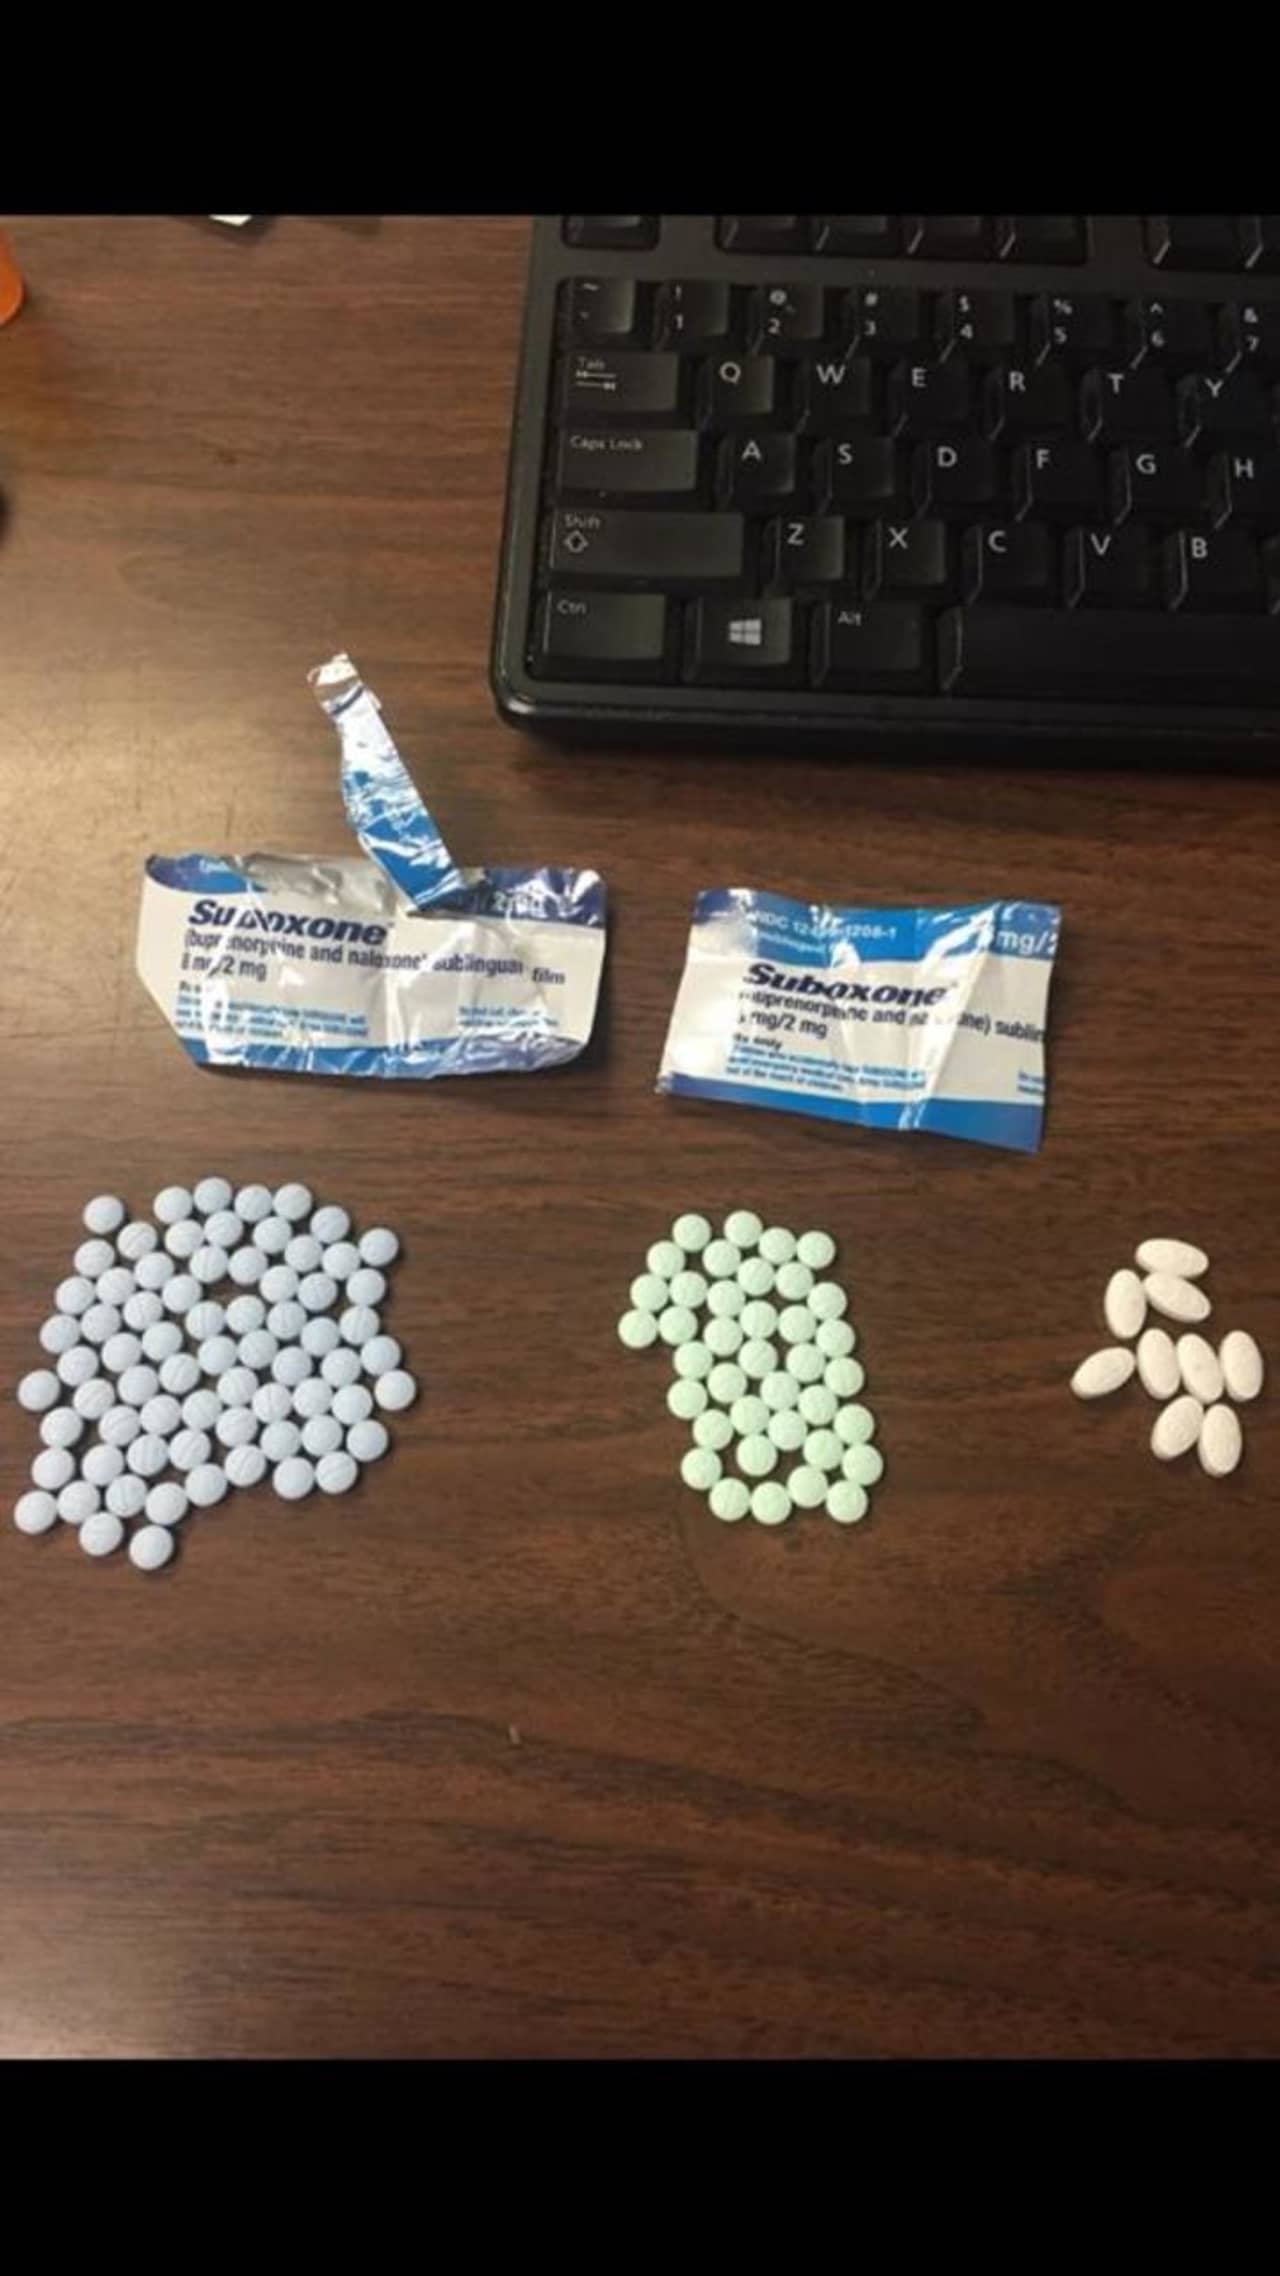 Suffern police found these prescription drugs in a car officers stopped Friday on Clinton Place for a suspended registration, police said.